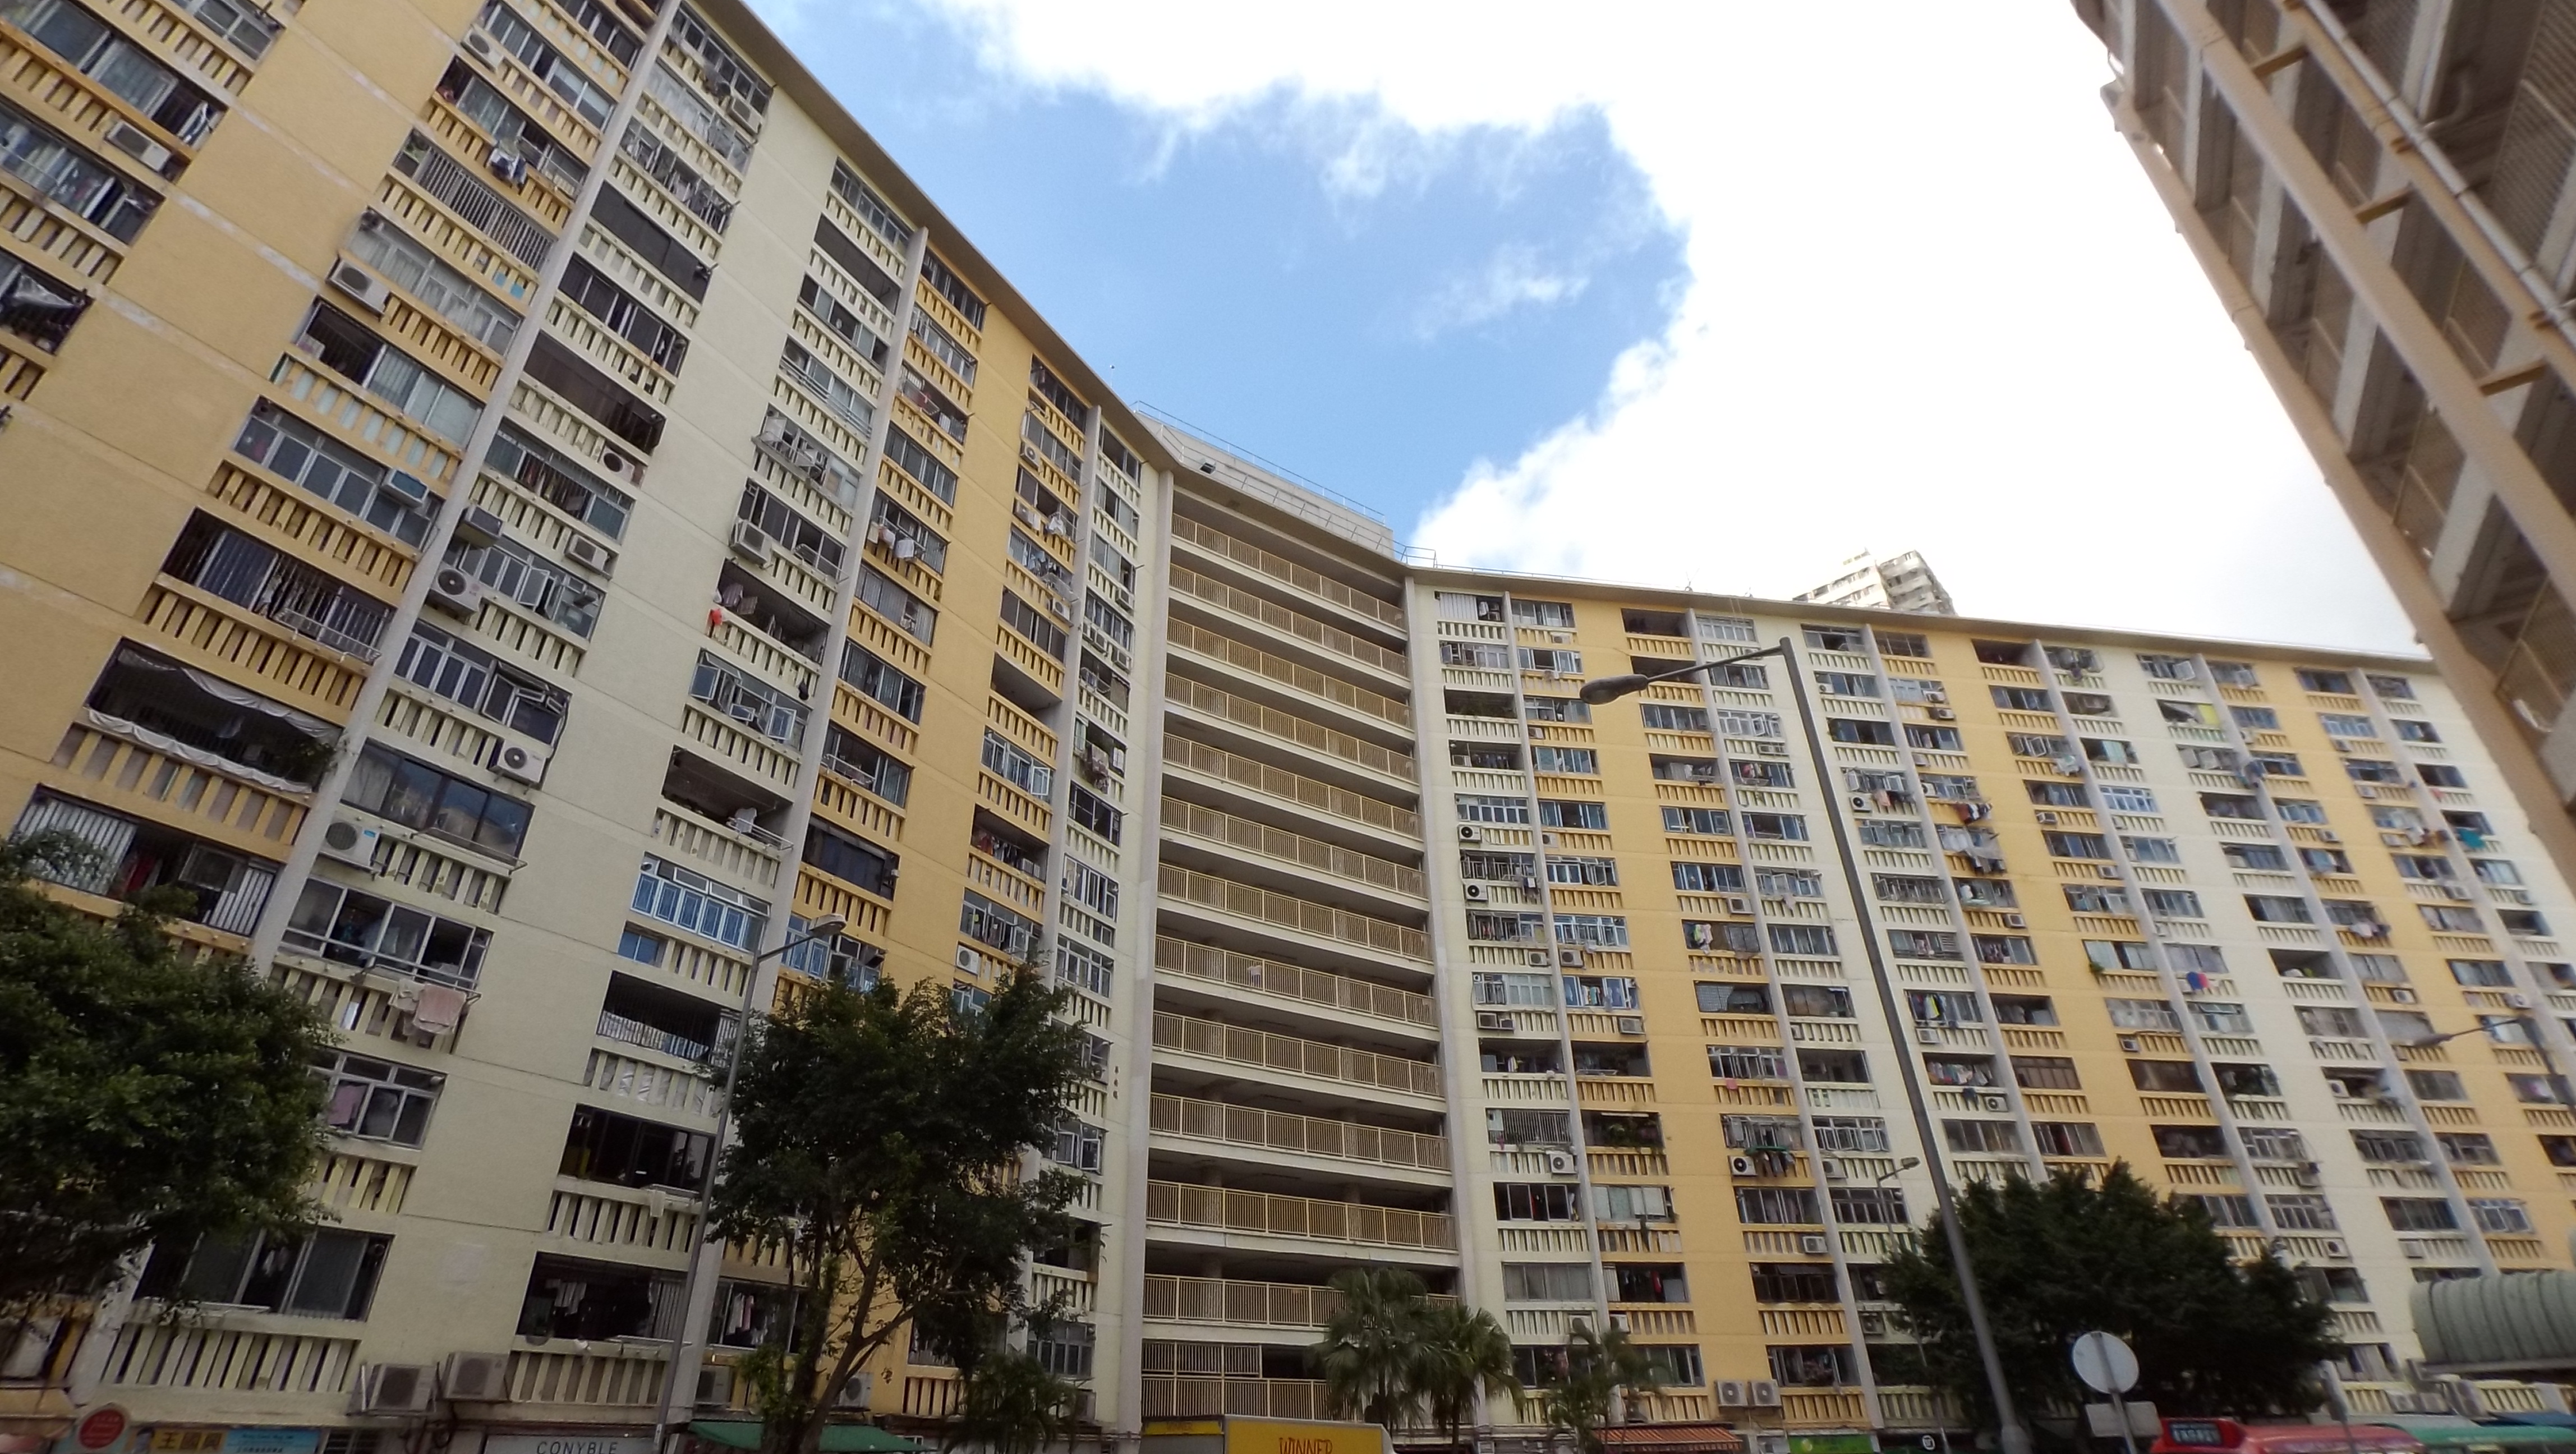 See the life of public housing residents at Wah Fu Estate